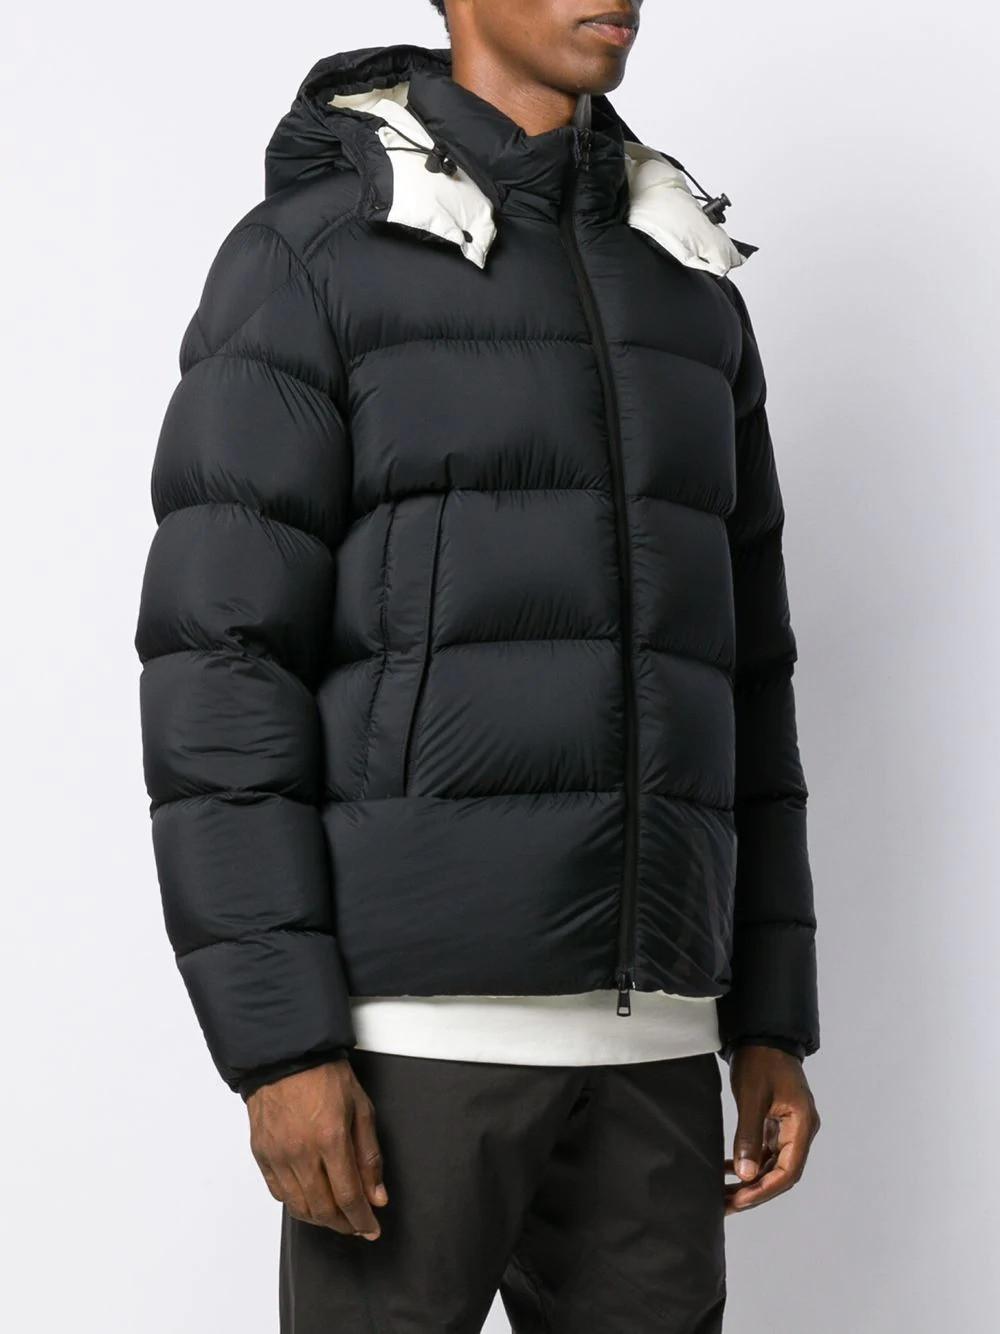 Moncler Synthetic Wilms Jacket in Black for Men - Lyst